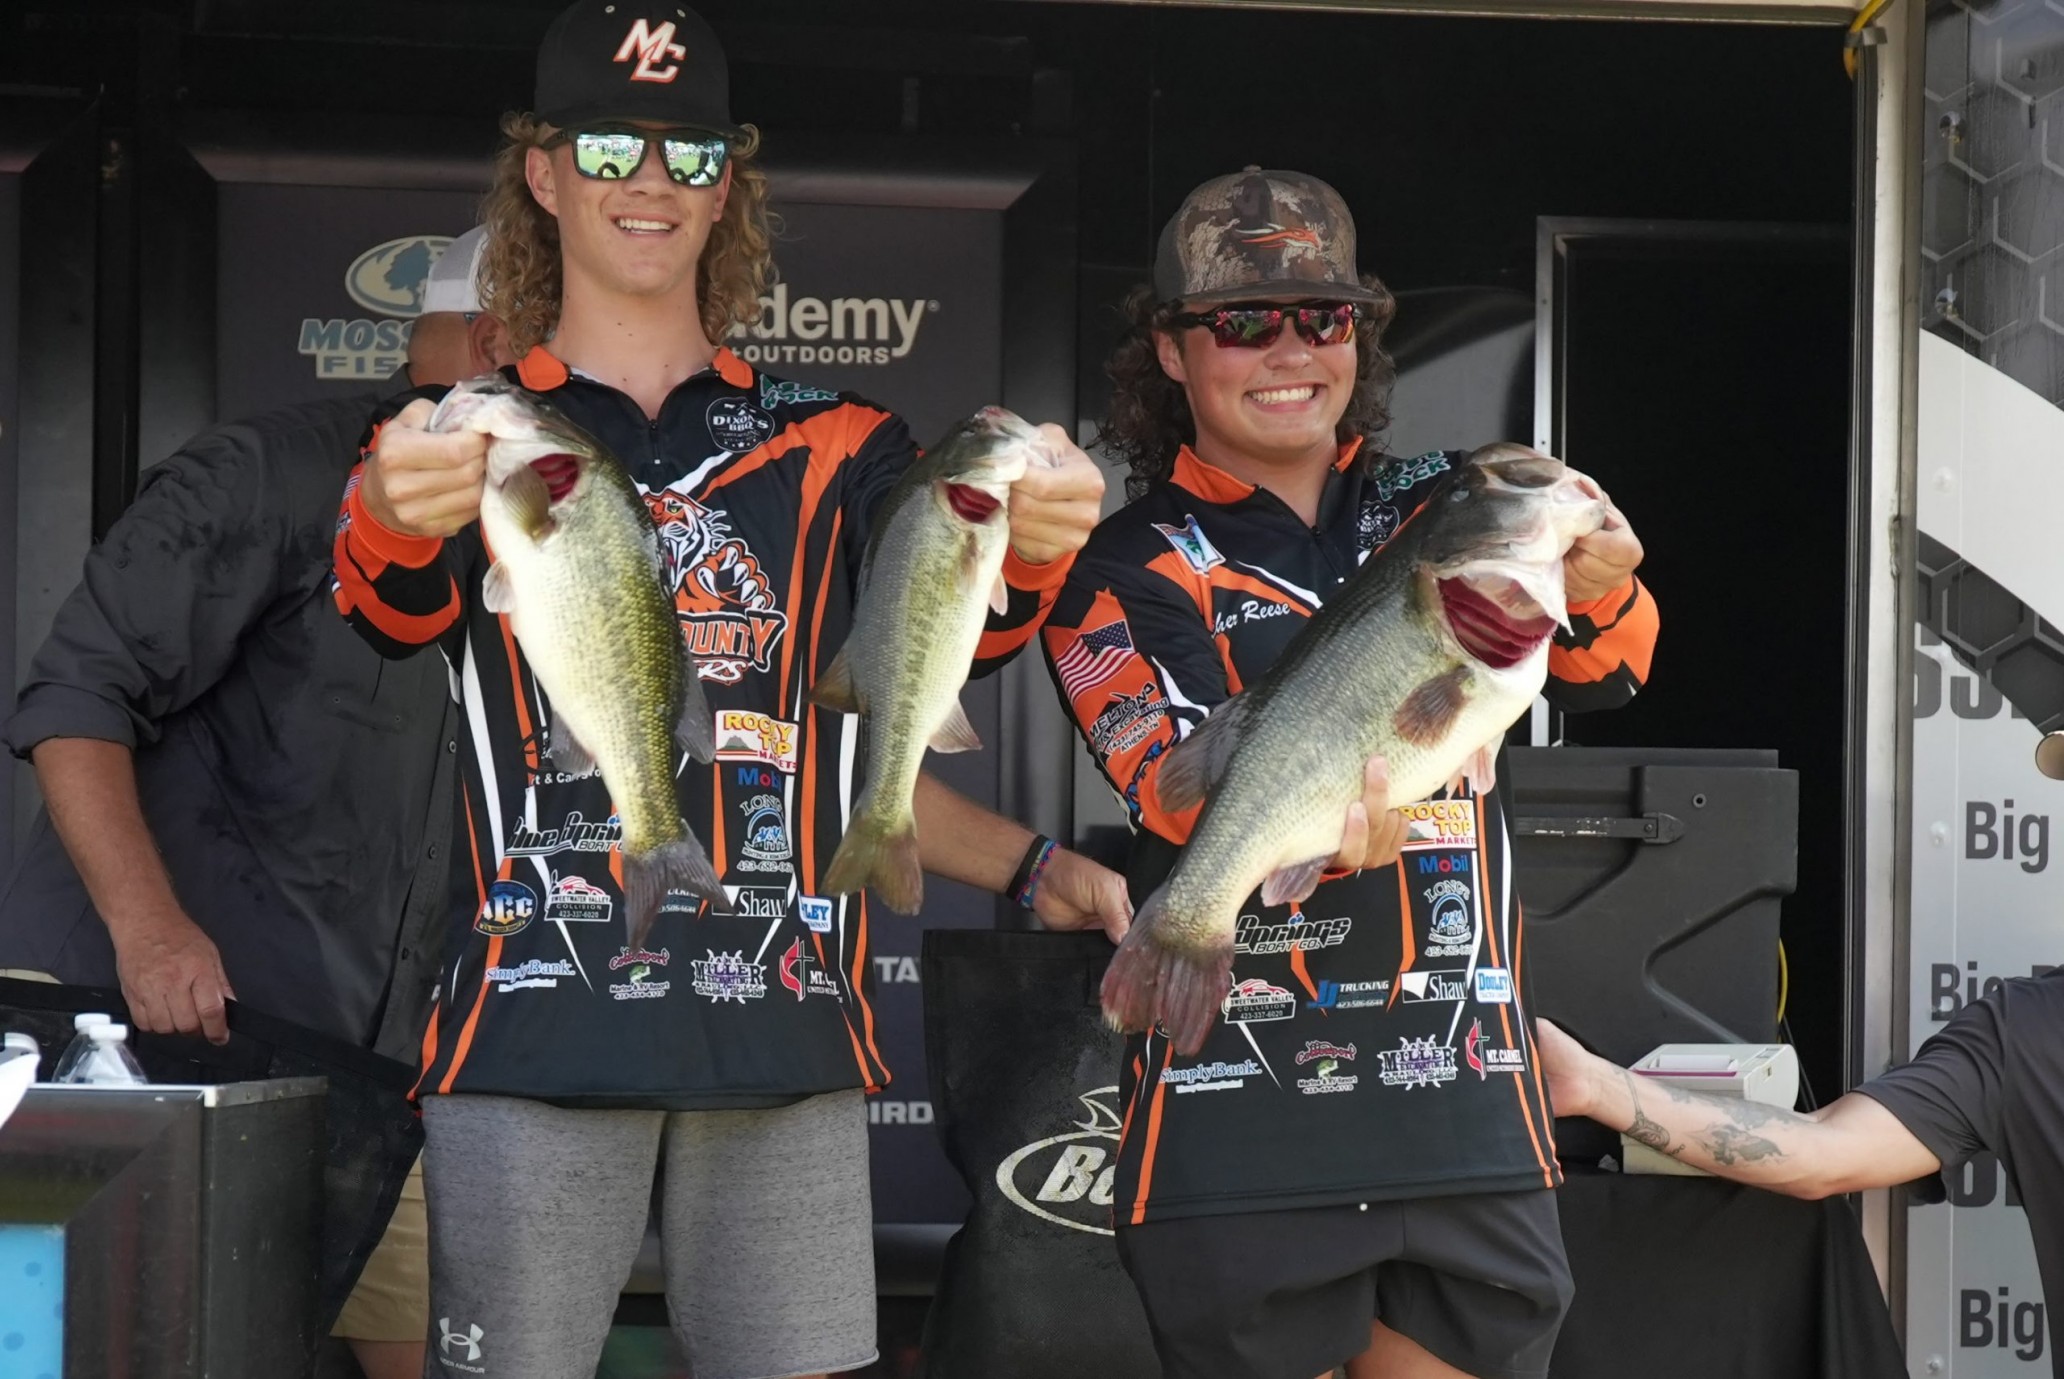 Tennessee Natives Claim Day 1 Lead At Bassmaster High School